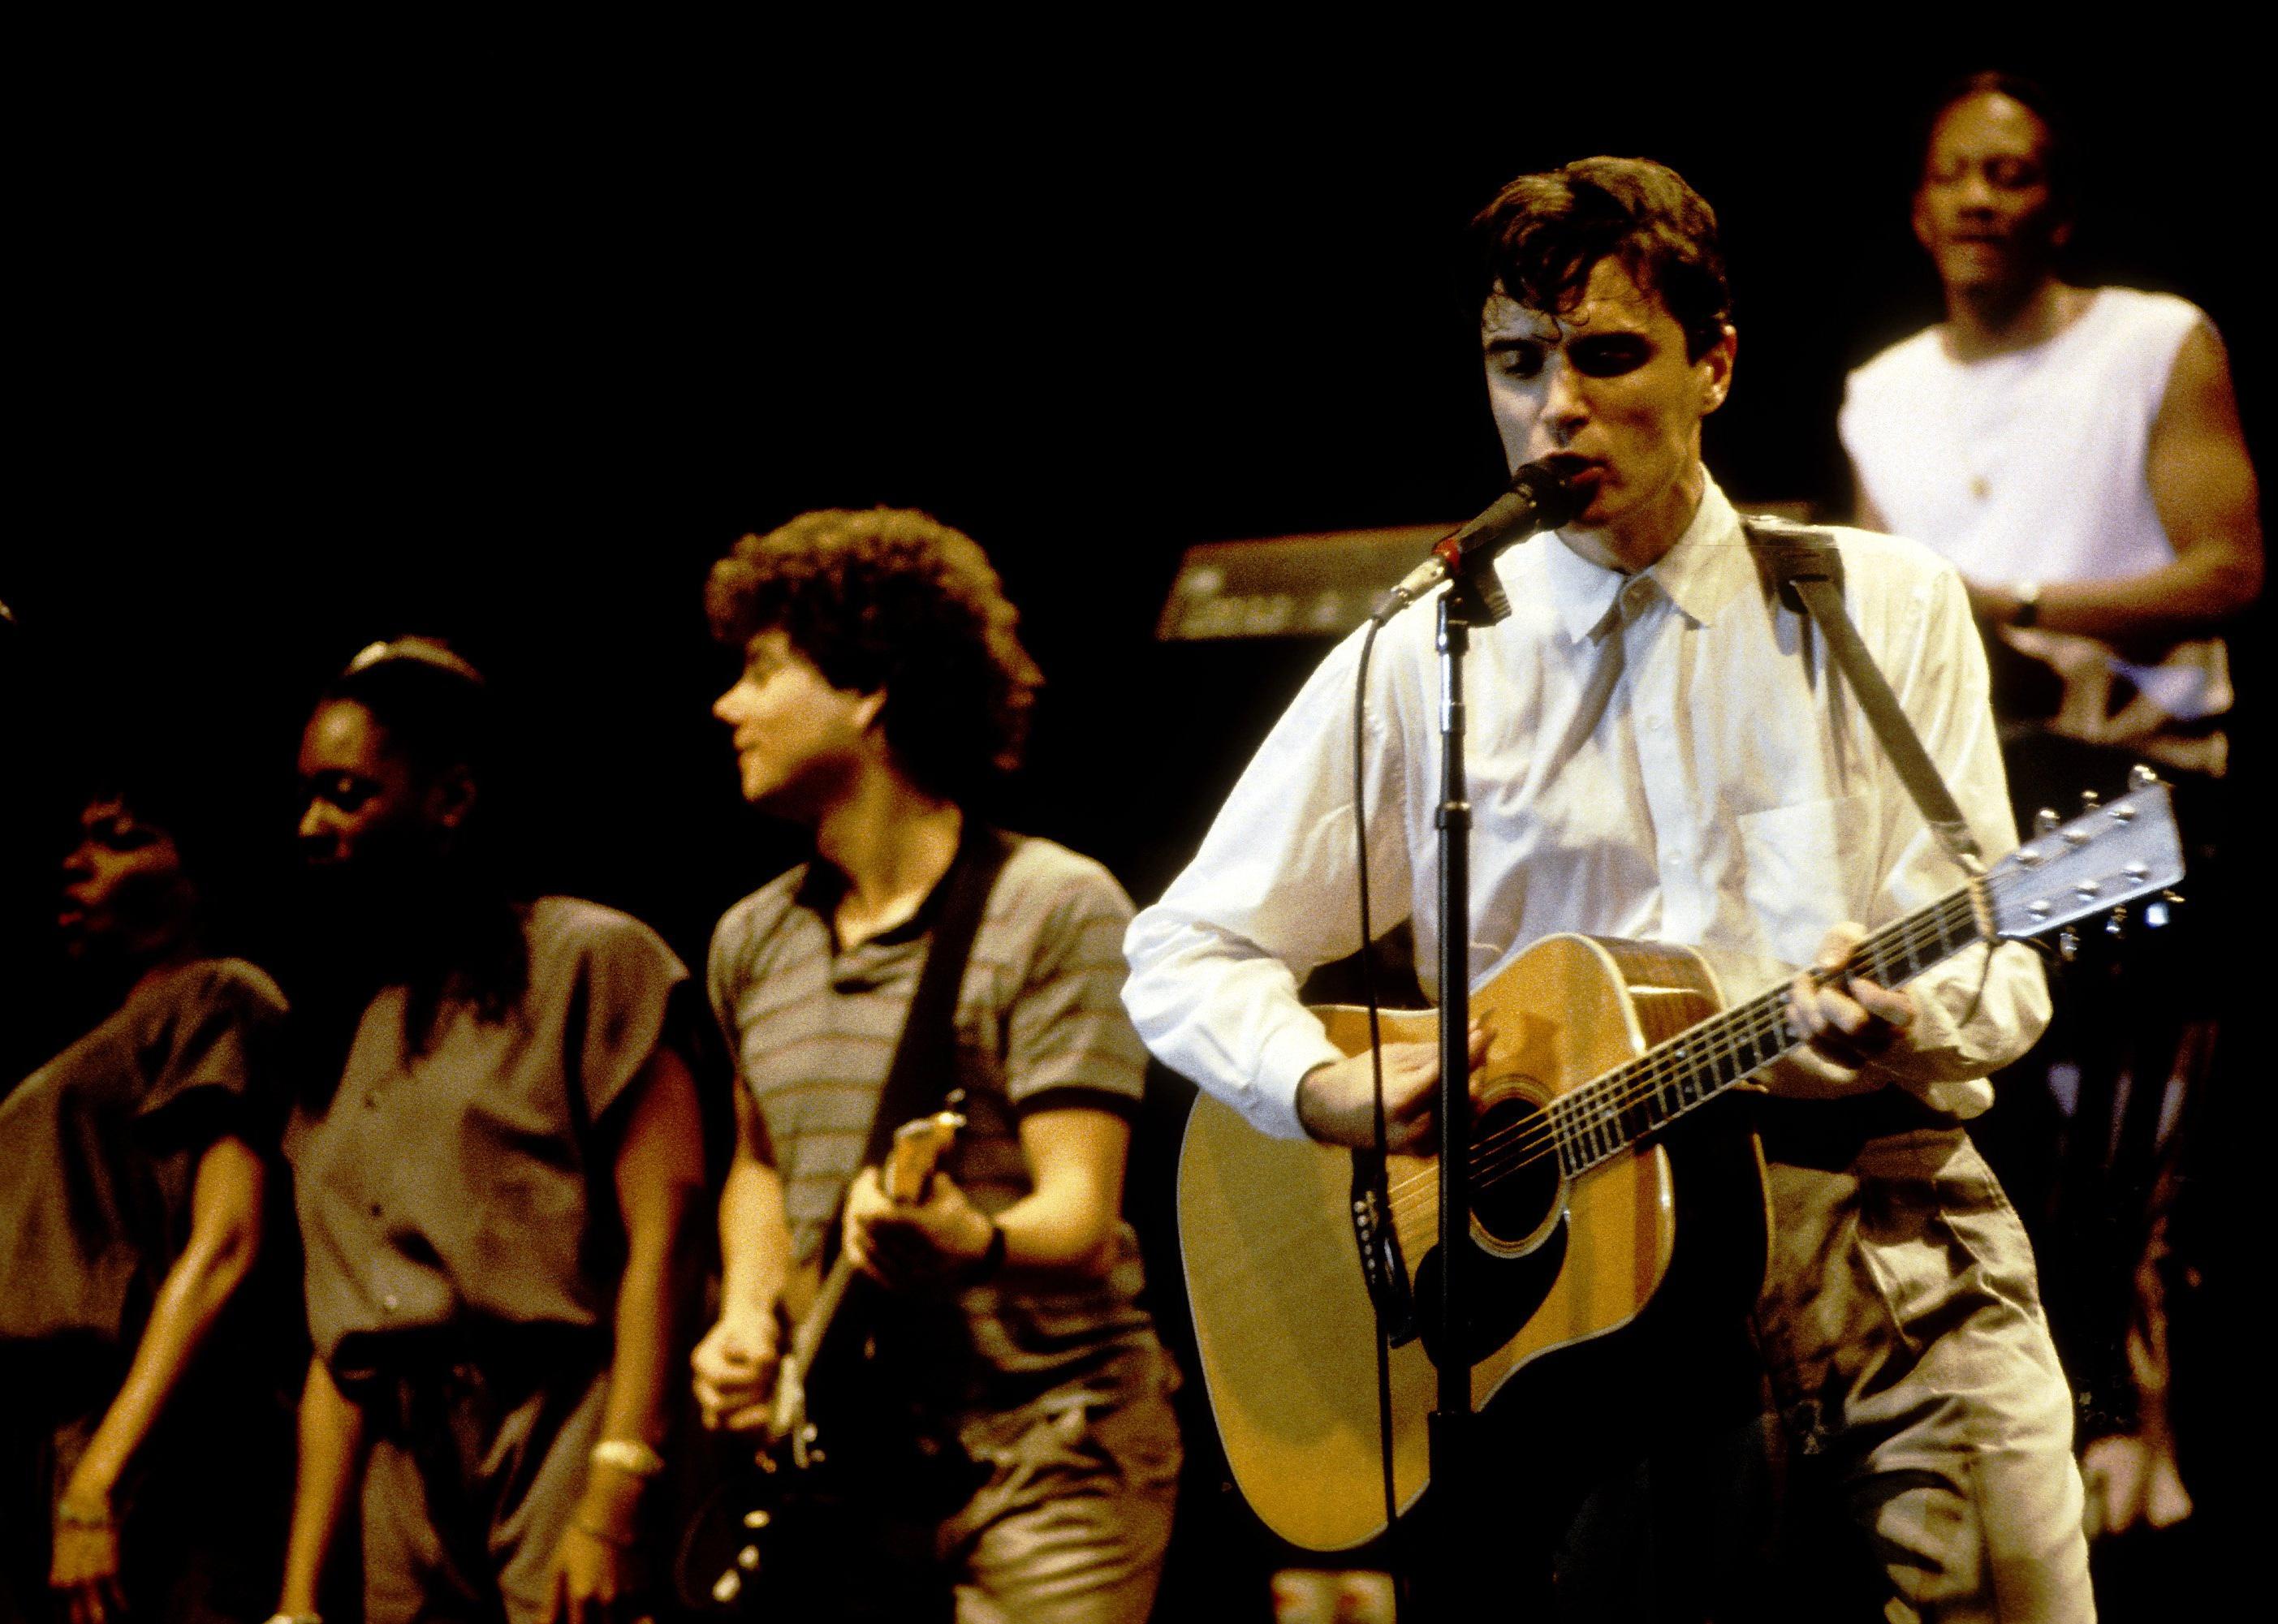 <p>The Talking Heads famously imbued their act with oversized suits and unique dance sequences while touring in support of their 1983 album "Speaking in Tongues." Director Jonathan Demme used footage of the band's three shows at Hollywood's Pantages Theater for the <a href="https://davidbyrne.com/explore/stop-making-sense">seminal concert documentary "Stop Making Sense."</a></p>